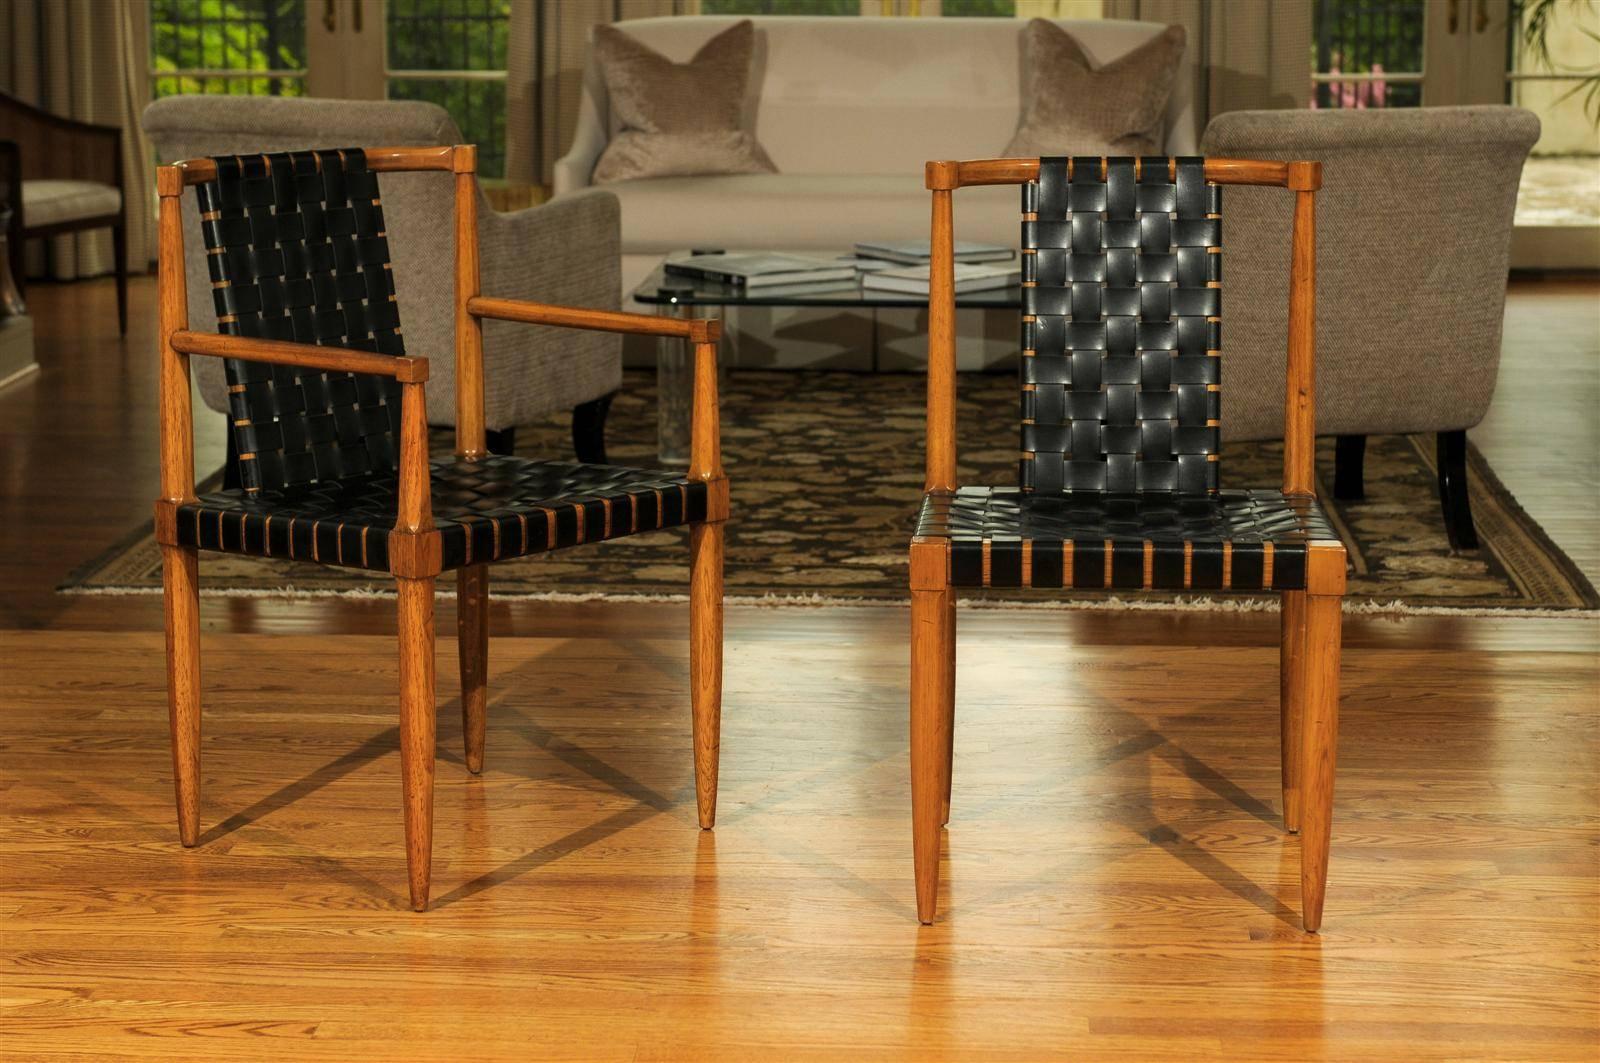 These magnificent dining chairs are shipped as professionally photographed and described in the listing narrative: Meticulously professionally restored and installation ready.

An incredibly rare set of eight (8) dining chairs from the Tomlinson